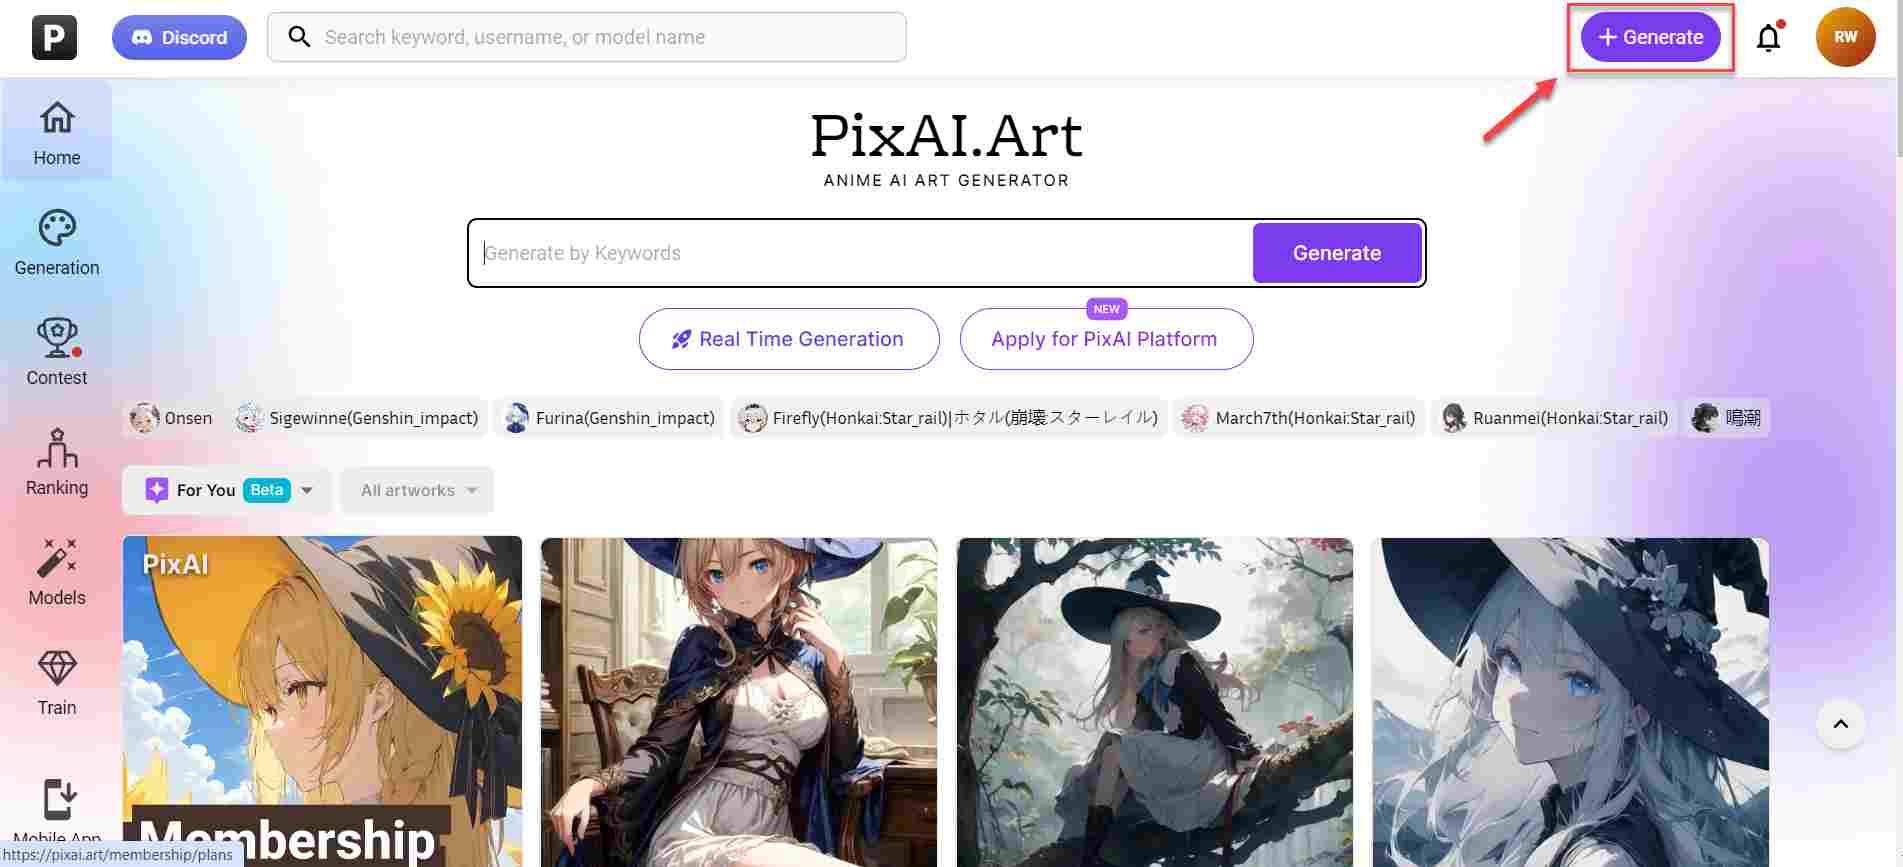 pixai.art-generate-button-highlighted-on-the-homepage